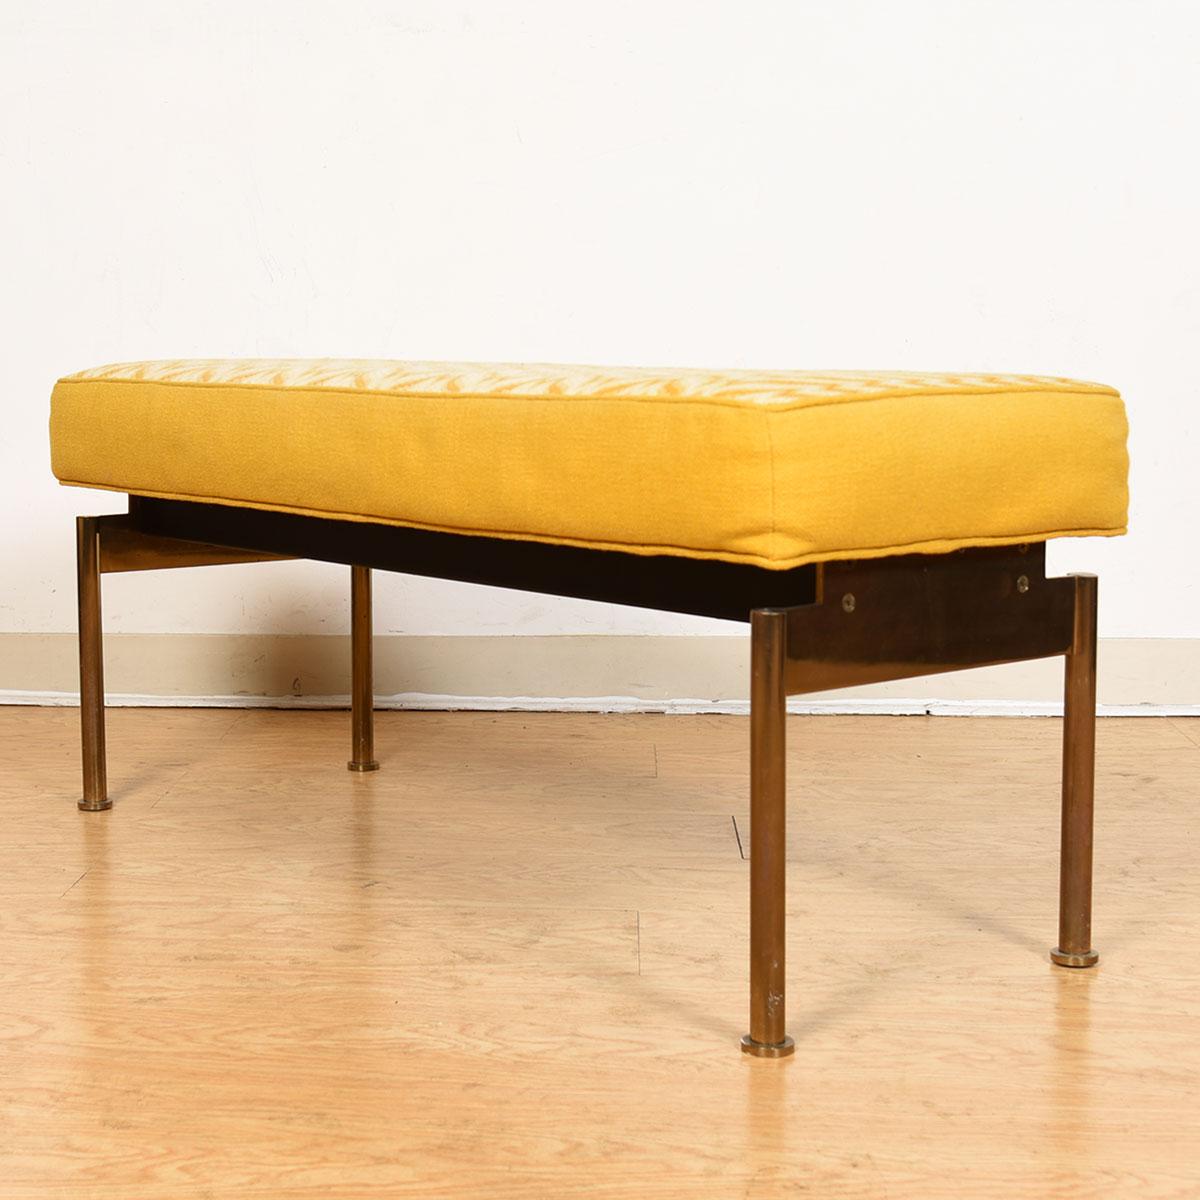 Designer midcentury Brass Bench Upholstered in a Bargello Handmade Cushion

Additional information:
Material: Brass, Upholstery
The brass frame accents the custom handmade white-and-yellow Bargello cushion. A wonderful pop of color on this